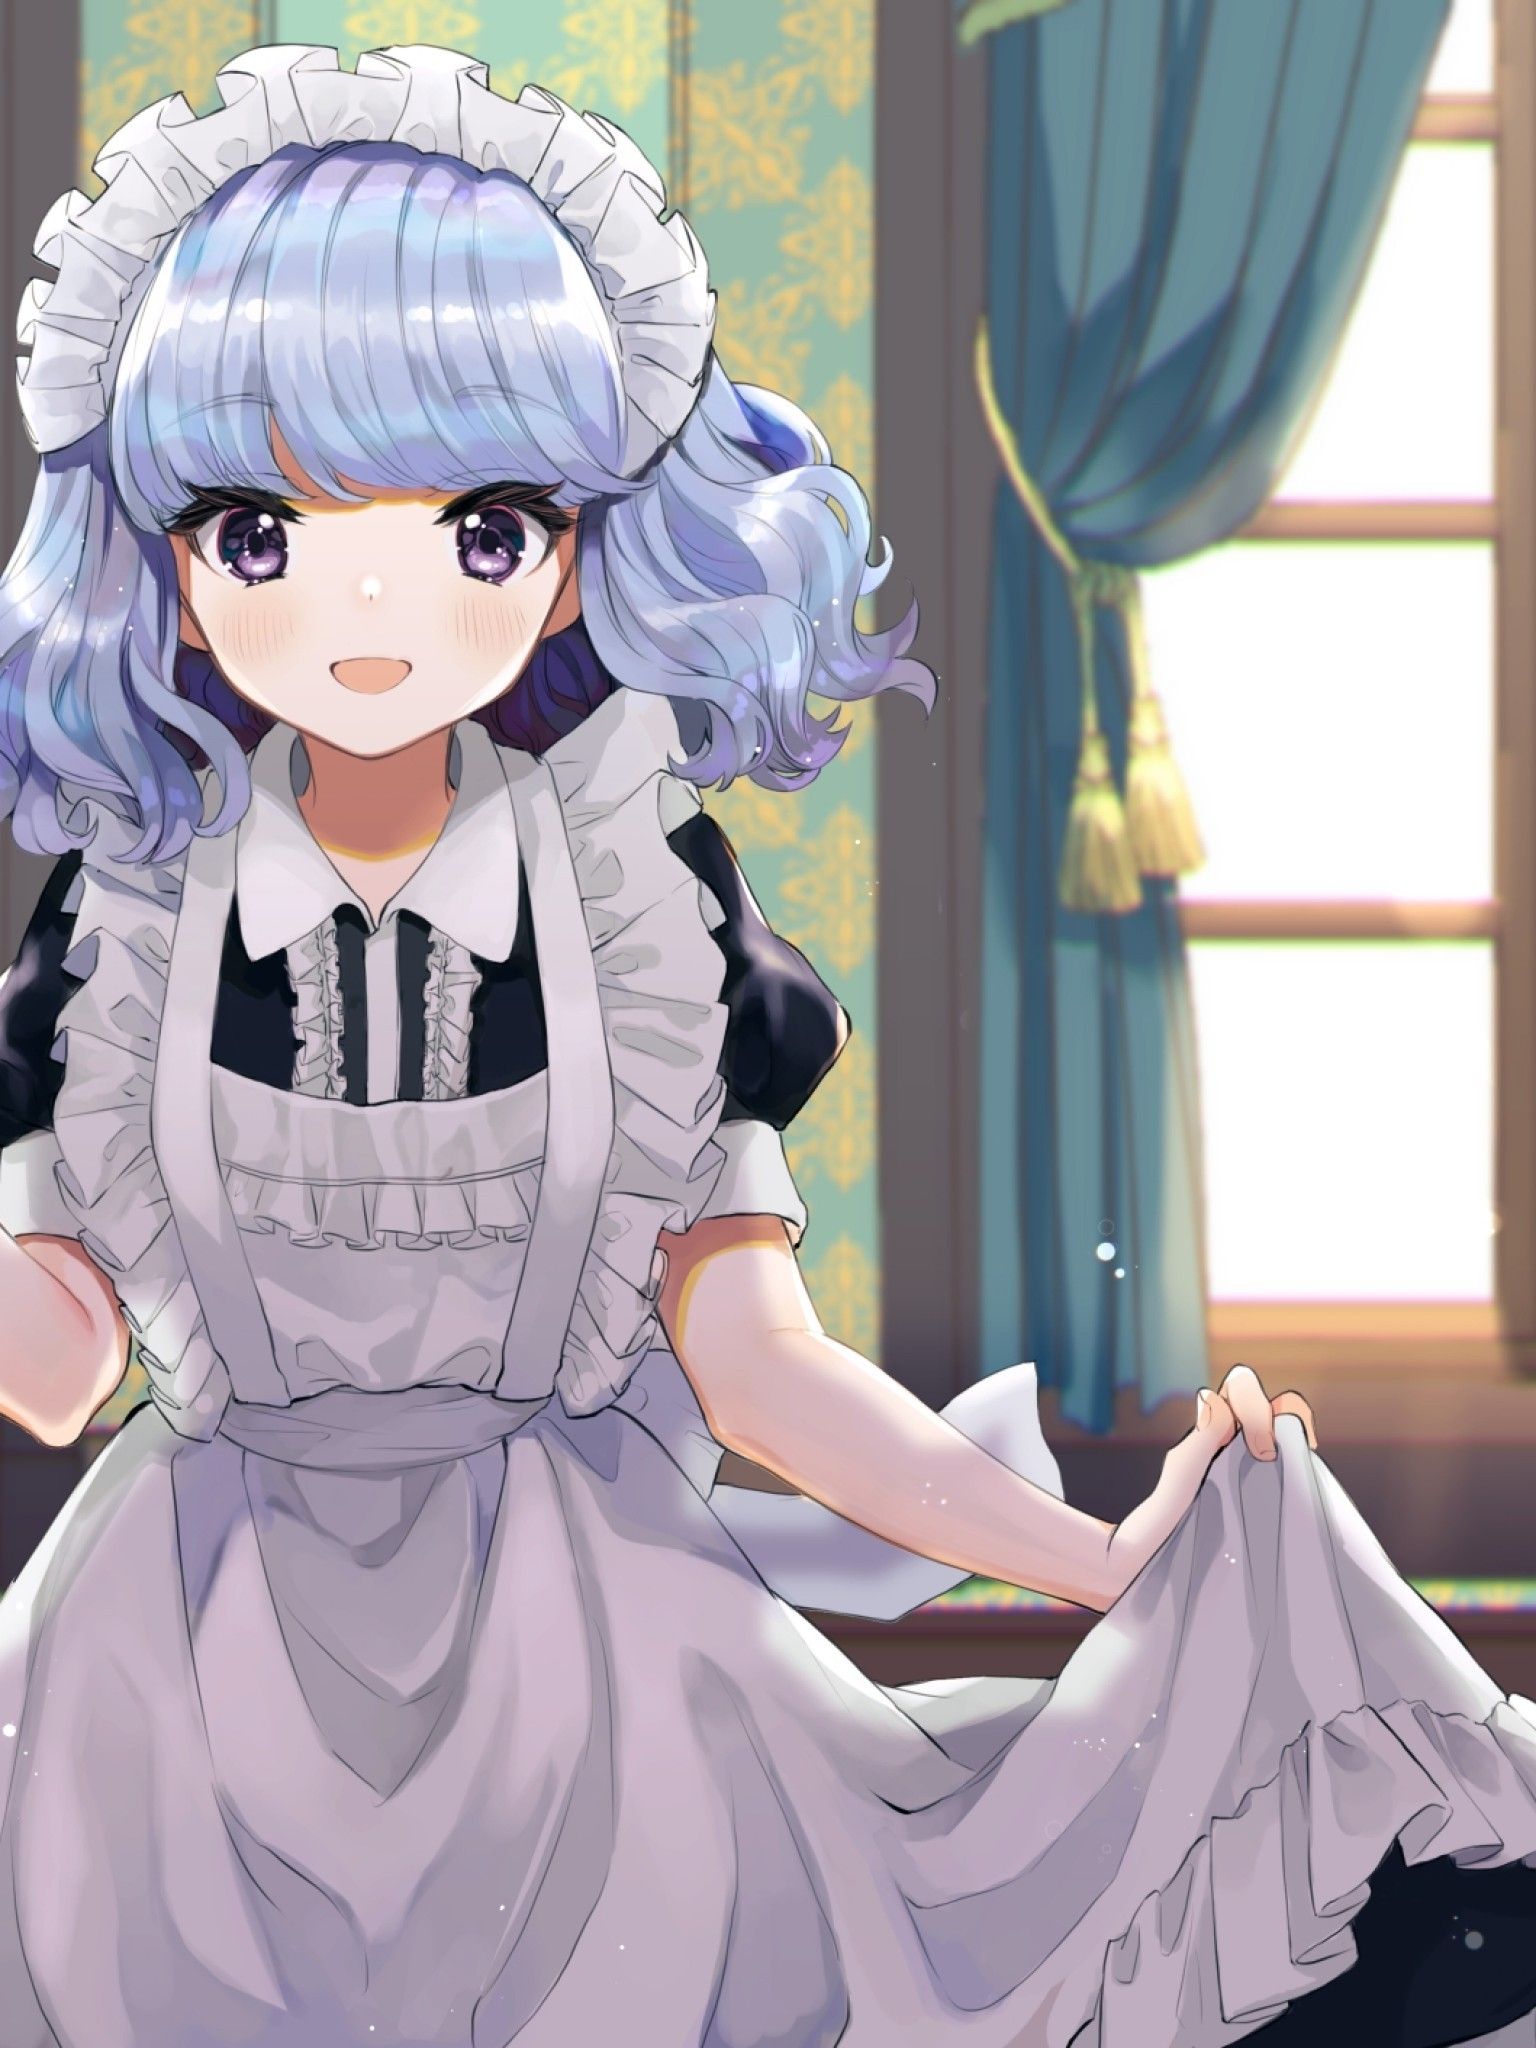 Cute Maid Outfit Wallpapers - Wallpaper Cave